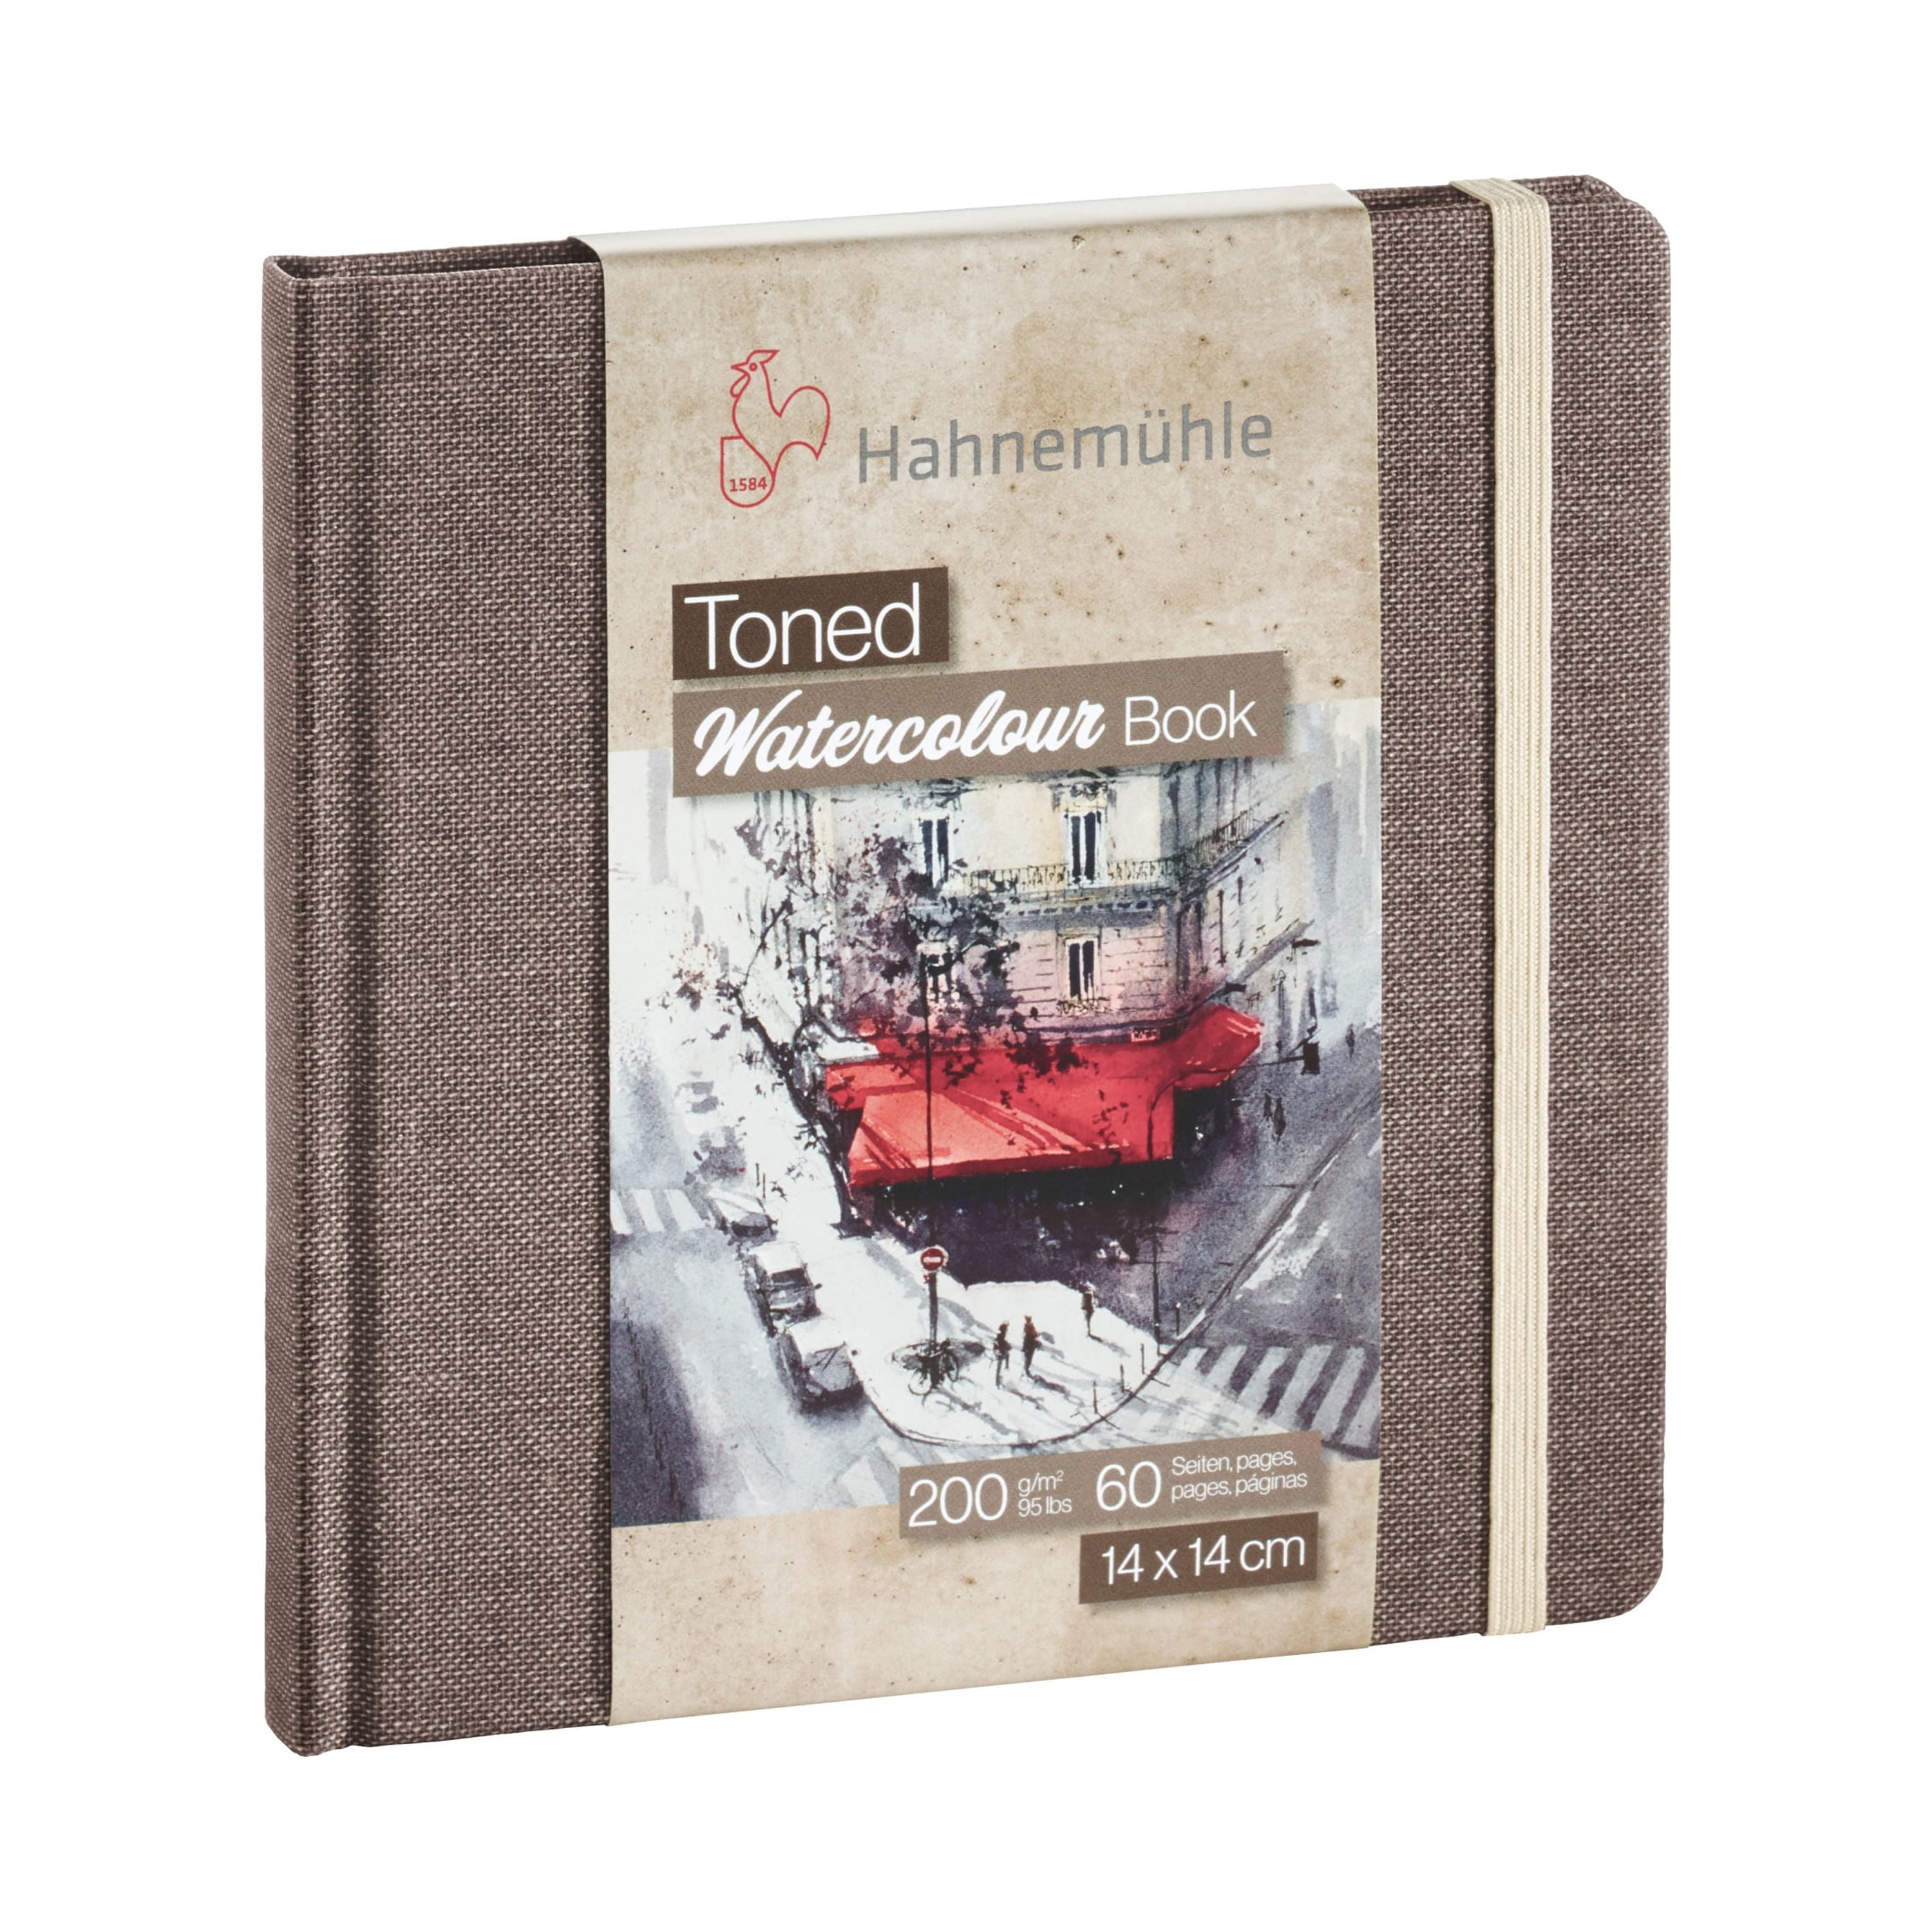 Hahnemuhle Toned Watercolor Paper Book, 30 Sheets, Landscape, A5